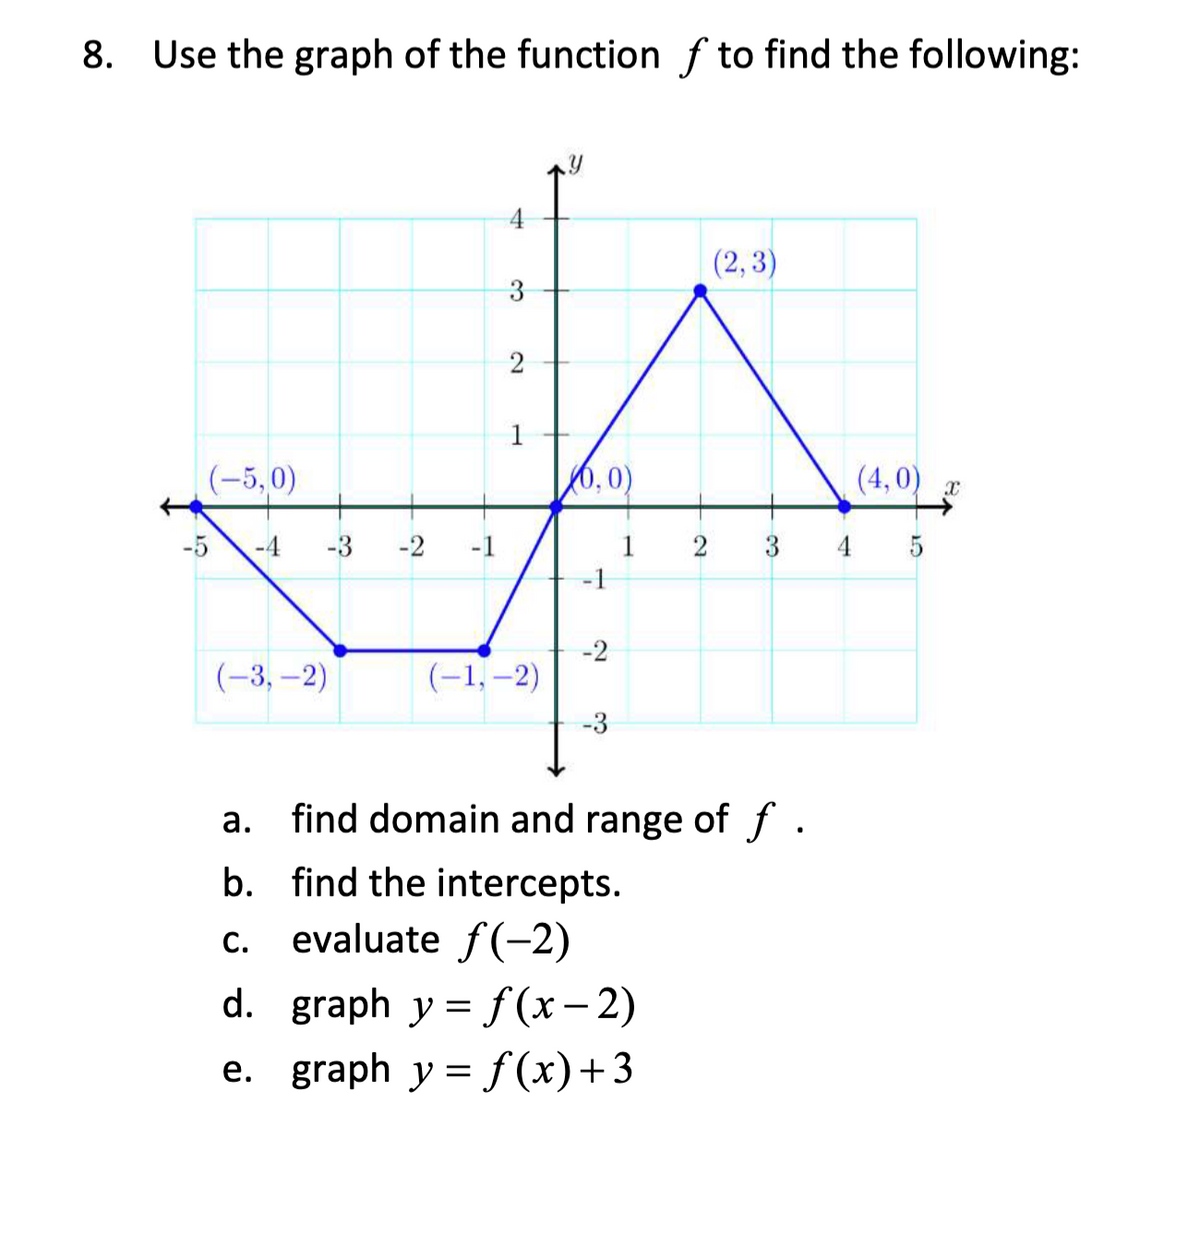 8. Use the graph of the function f to find the following:
(-5,0)
-4
-3 -2 -1
(-3,-2)
4
3
2
1
(-1,-2)
0,0)
-1
-2
-3
1
2
(2,3)
3
a. find domain and range of f.
b. find the intercepts.
c. evaluate f(-2)
d. graph y = f(x-2)
e. graph y = f(x)+3
(4,0) X
4 5